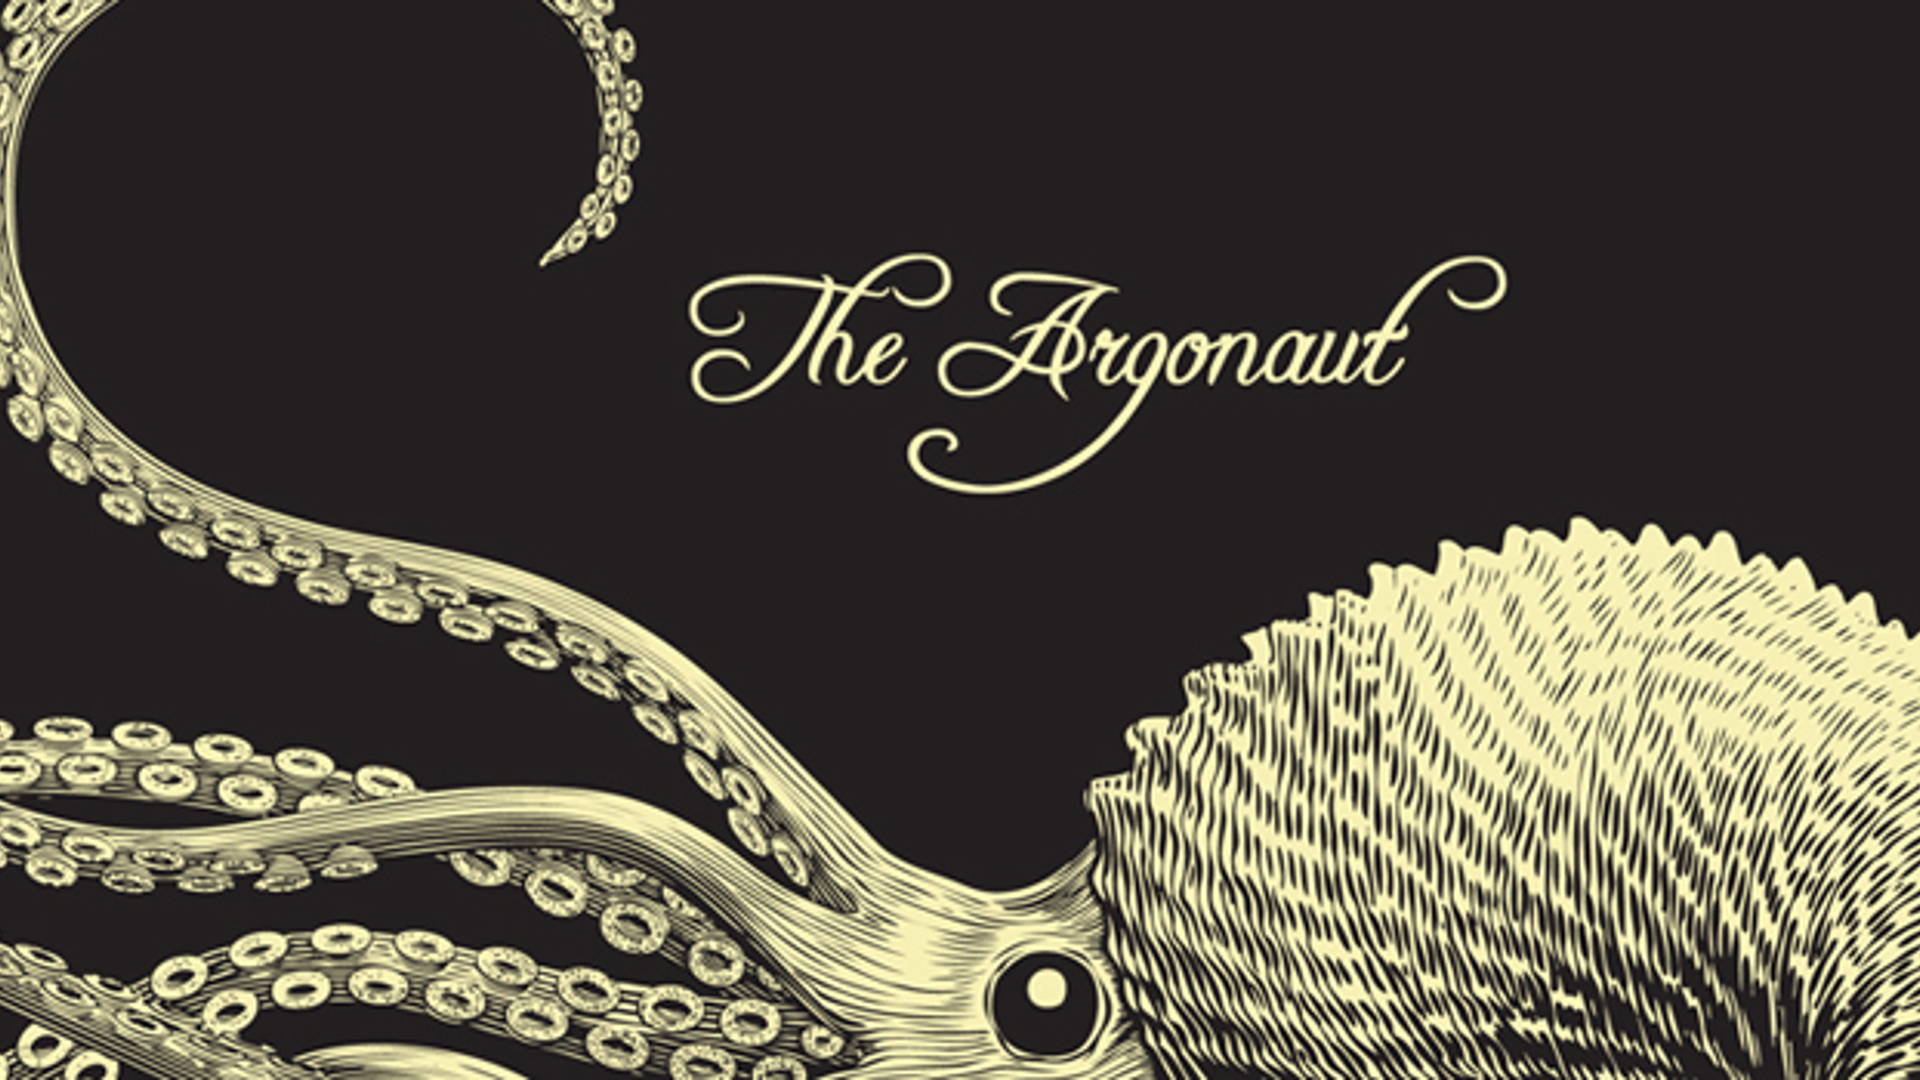 Featured image for Eight Arms, The Argonaut